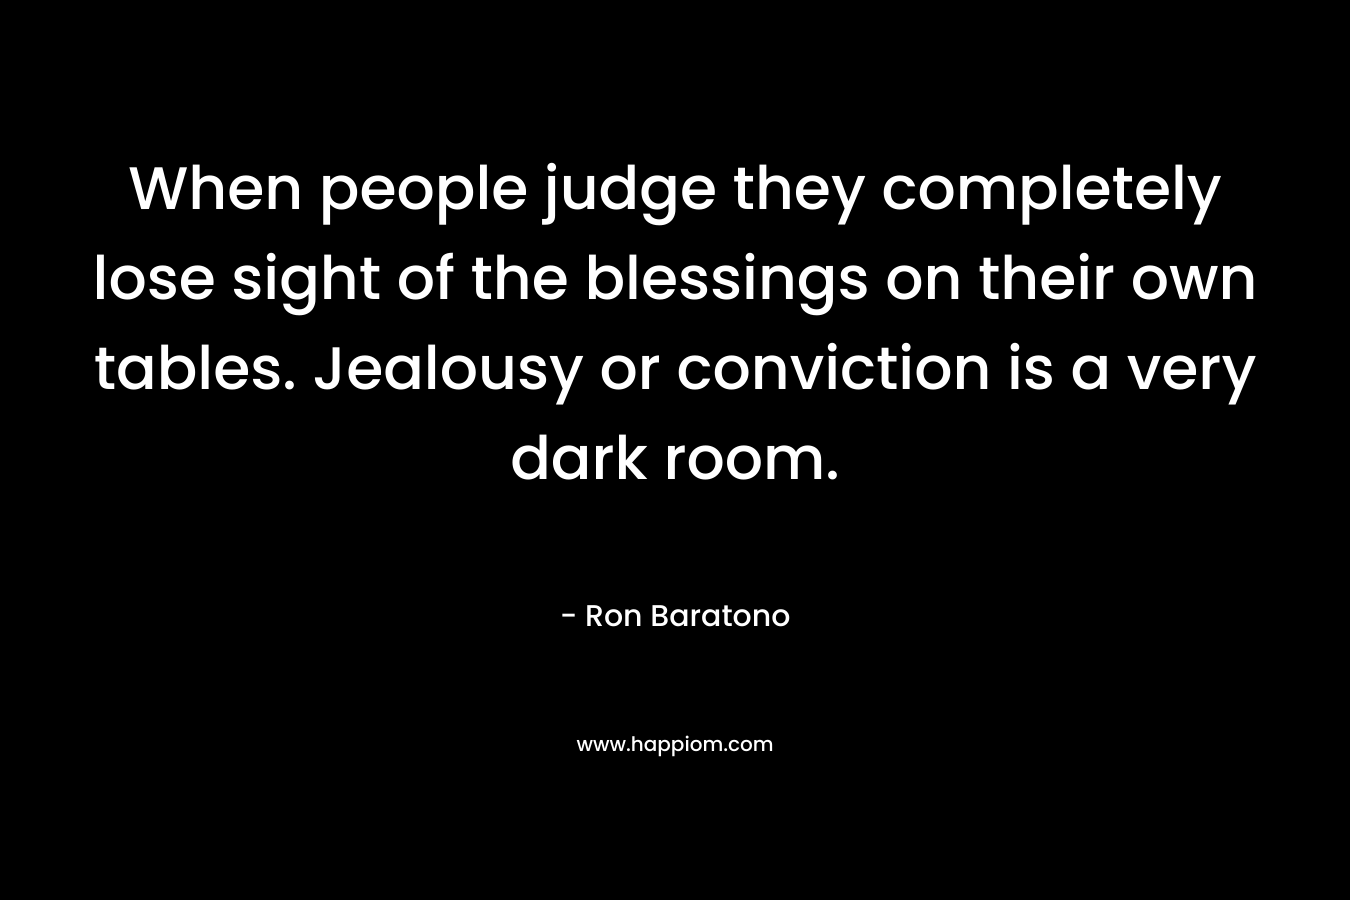 When people judge they completely lose sight of the blessings on their own tables. Jealousy or conviction is a very dark room.